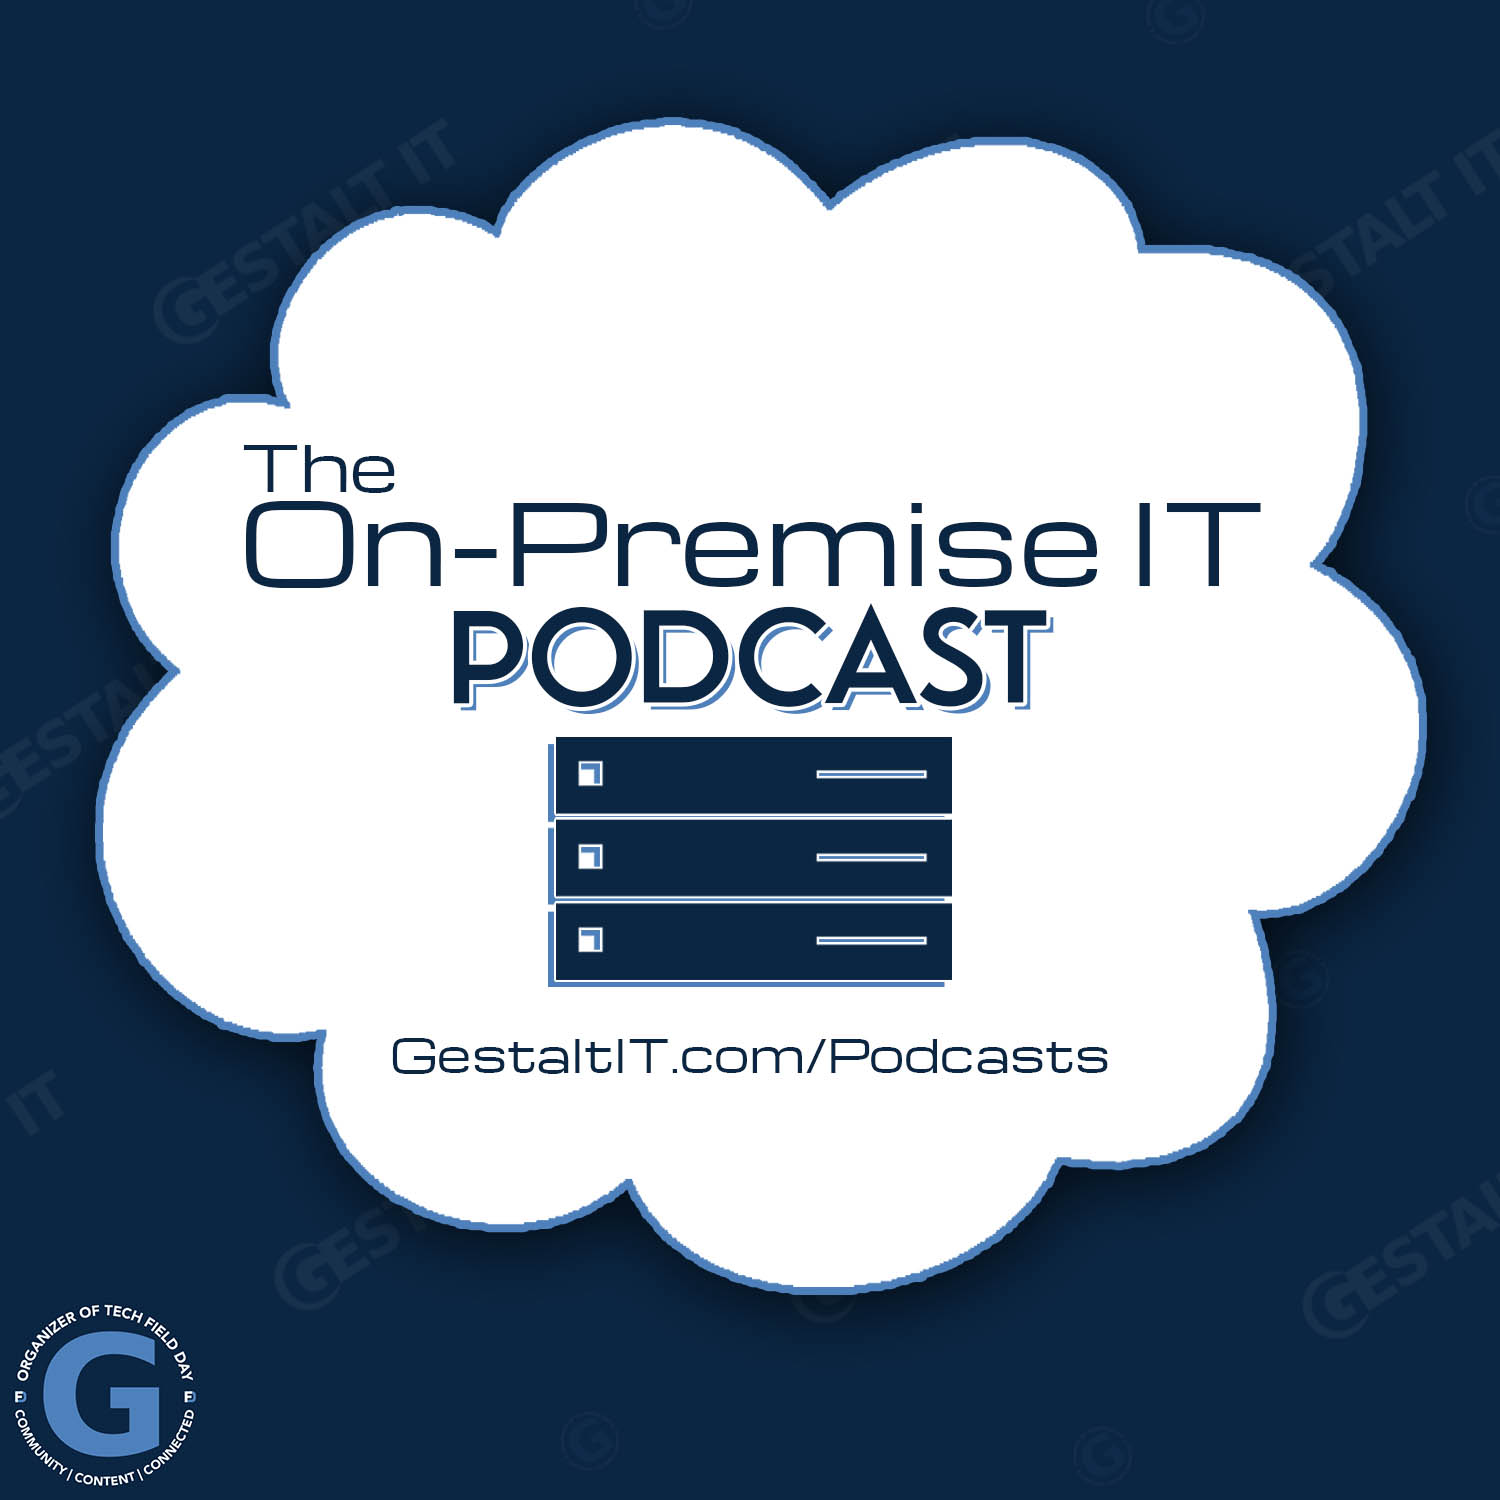 On-Premise IT Podcast